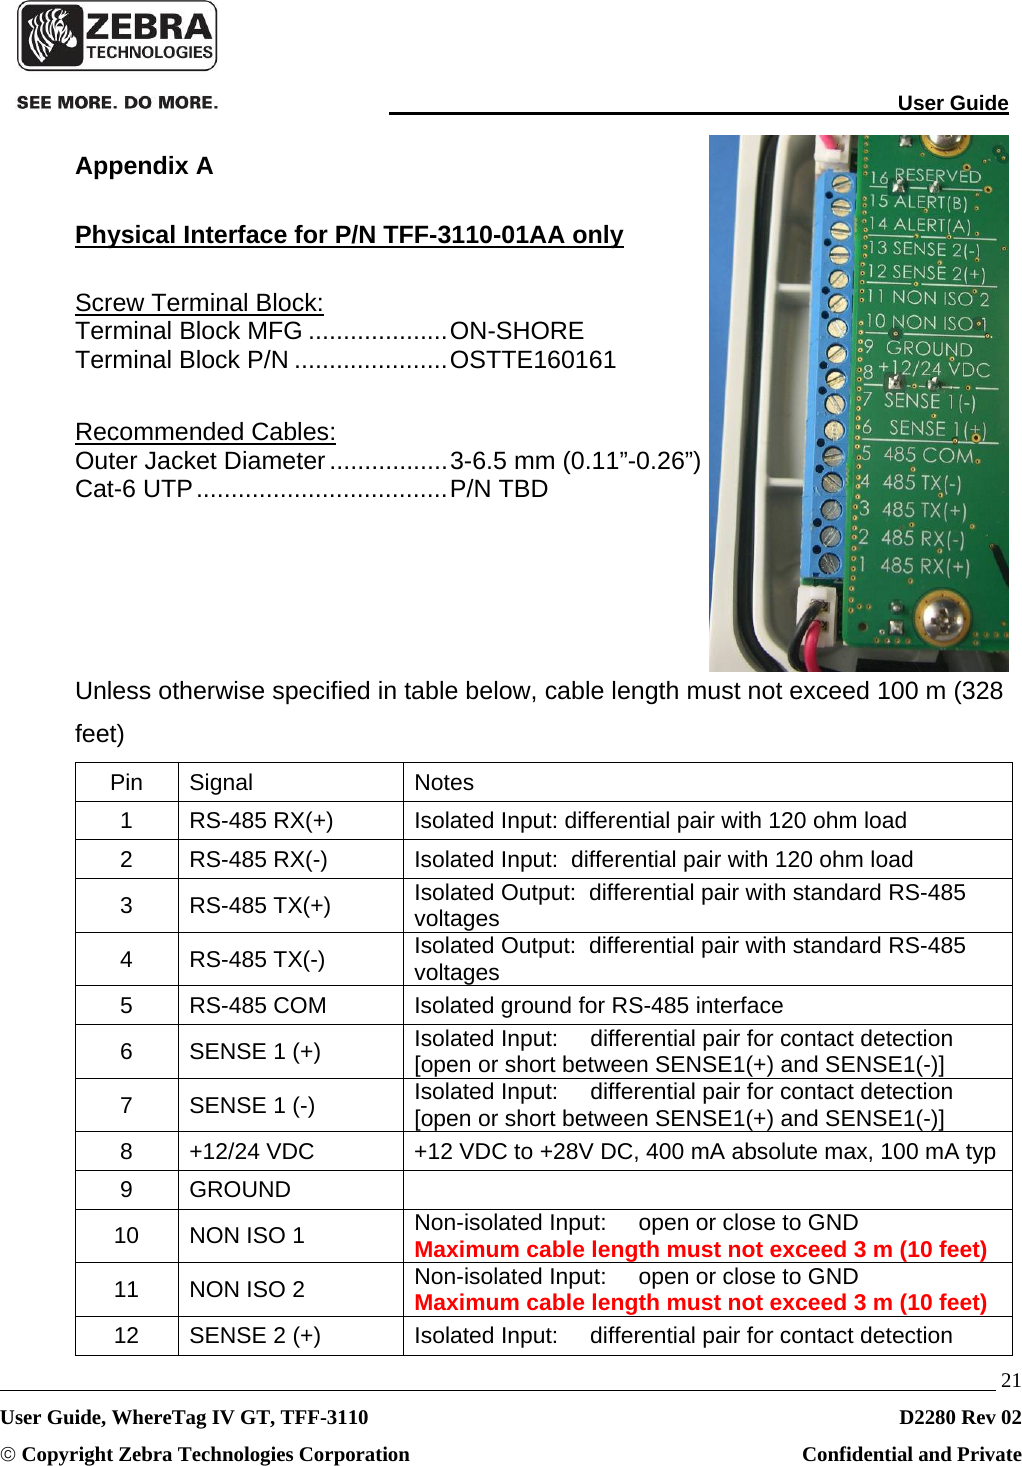                                                                                                                                User Guide   21 User Guide, WhereTag IV GT, TFF-3110  D2280 Rev 02 © Copyright Zebra Technologies Corporation  Confidential and Private Appendix A Physical Interface for P/N TFF-3110-01AA only Screw Terminal Block: Terminal Block MFG .................... ON-SHORE Terminal Block P/N ...................... OSTTE160161  Recommended Cables: Outer Jacket Diameter ................. 3-6.5 mm (0.11”-0.26”) Cat-6 UTP .................................... P/N  TBD     Unless otherwise specified in table below, cable length must not exceed 100 m (328 feet) Pin Signal  Notes 1  RS-485 RX(+)  Isolated Input: differential pair with 120 ohm load 2  RS-485 RX(-)  Isolated Input:  differential pair with 120 ohm load 3 RS-485 TX(+)  Isolated Output:  differential pair with standard RS-485 voltages 4 RS-485 TX(-)  Isolated Output:  differential pair with standard RS-485 voltages 5  RS-485 COM  Isolated ground for RS-485 interface 6  SENSE 1 (+)  Isolated Input:     differential pair for contact detection [open or short between SENSE1(+) and SENSE1(-)] 7  SENSE 1 (-)  Isolated Input:     differential pair for contact detection [open or short between SENSE1(+) and SENSE1(-)] 8  +12/24 VDC  +12 VDC to +28V DC, 400 mA absolute max, 100 mA typ 9 GROUND   10  NON ISO 1  Non-isolated Input:     open or close to GND Maximum cable length must not exceed 3 m (10 feet) 11  NON ISO 2  Non-isolated Input:     open or close to GND Maximum cable length must not exceed 3 m (10 feet) 12  SENSE 2 (+)  Isolated Input:     differential pair for contact detection 